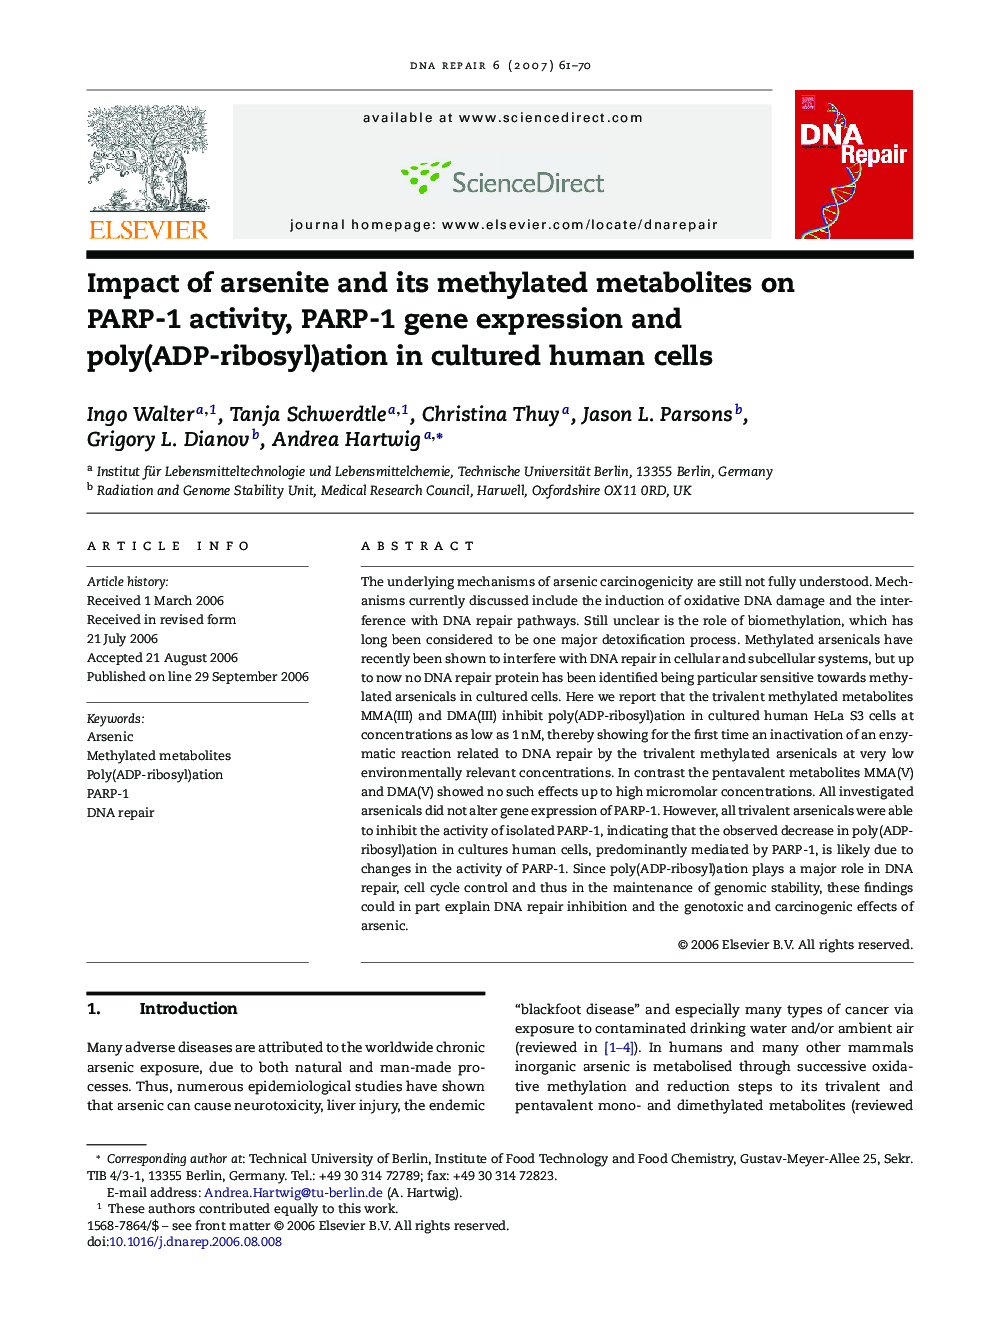 Impact of arsenite and its methylated metabolites on PARP-1 activity, PARP-1 gene expression and poly(ADP-ribosyl)ation in cultured human cells